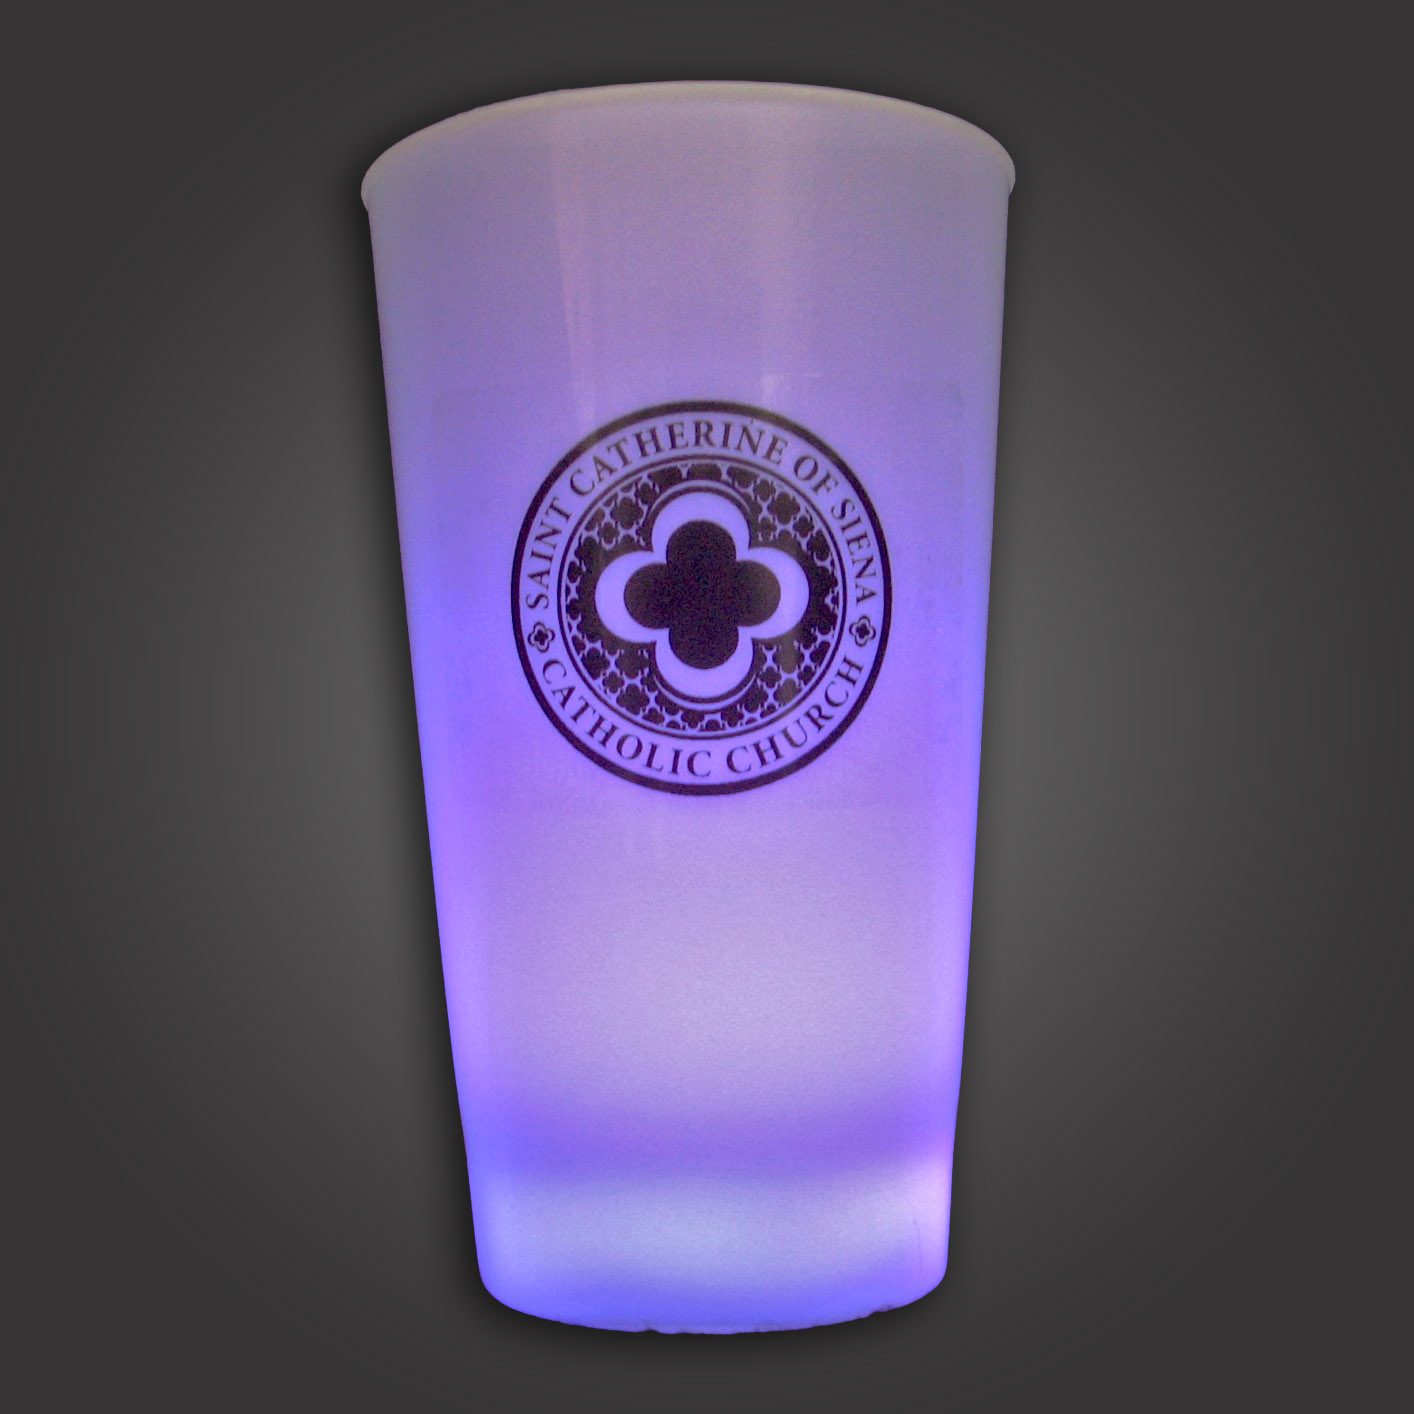 https://www.extremeglow.com/resize/Shared/Images/Product/Customized-16-oz-Lighted-Glass/custom-cup-copy-1.jpg?bw=1000&w=1000&bh=1000&h=1000